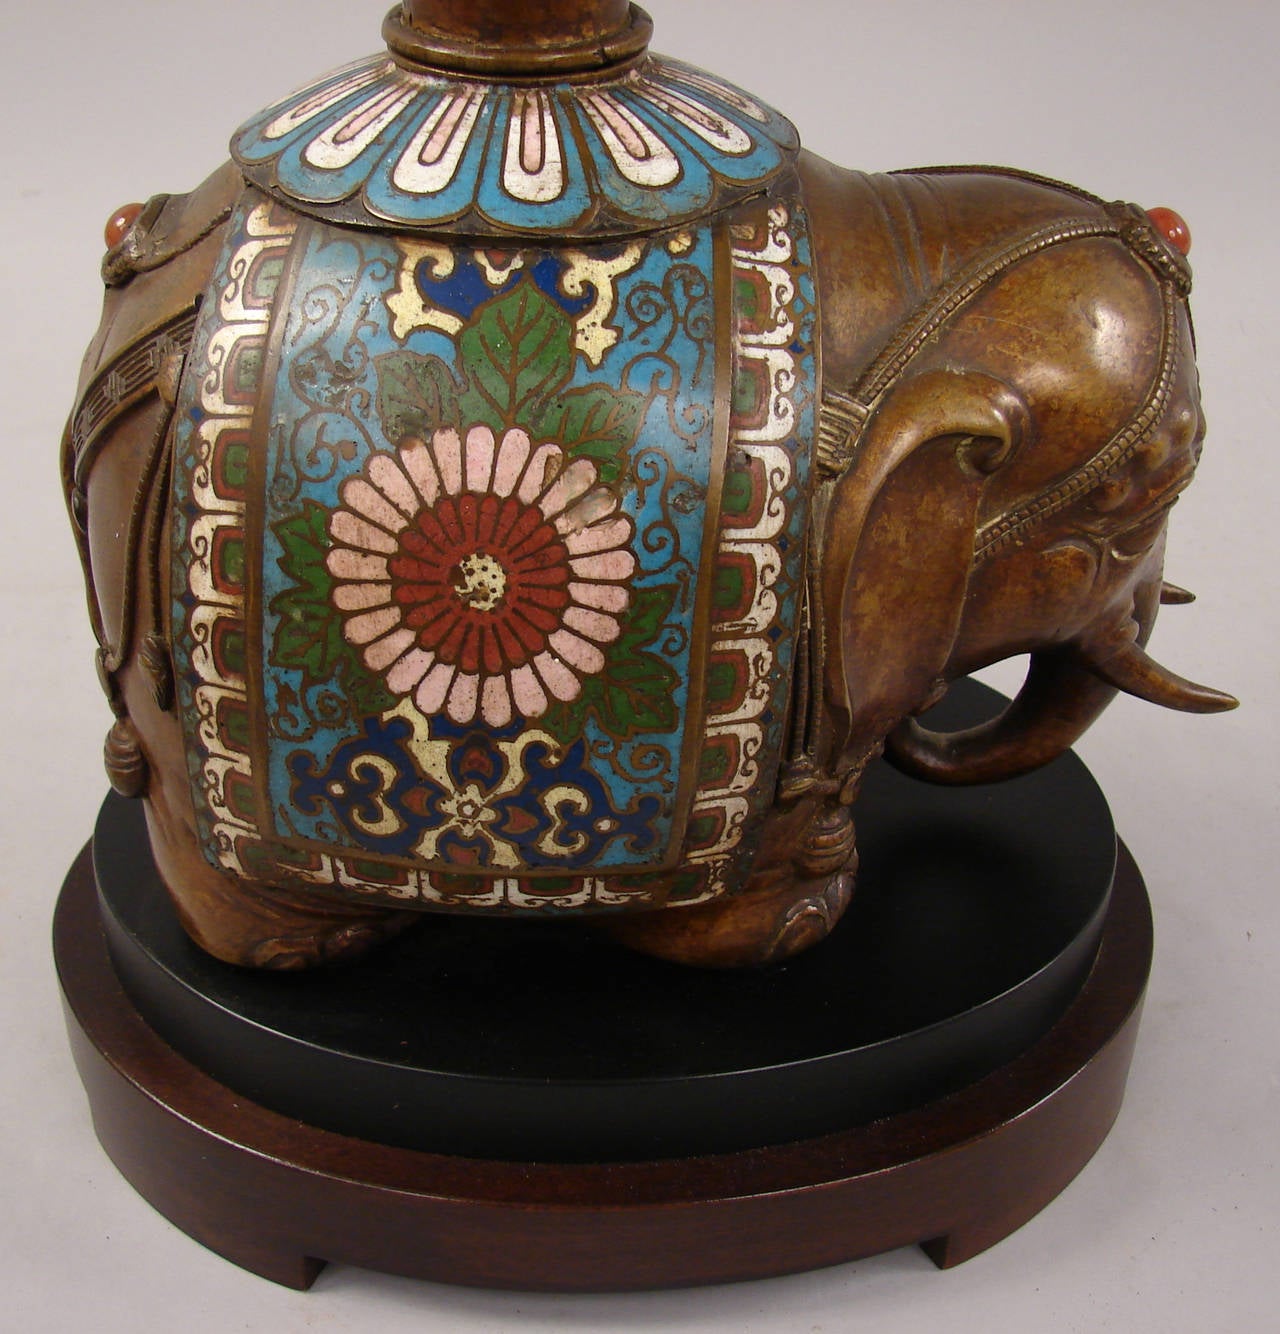 A stout Chinese champleve and bronze elephant now mounted as a lamp. Circa 1900 0r earlier.